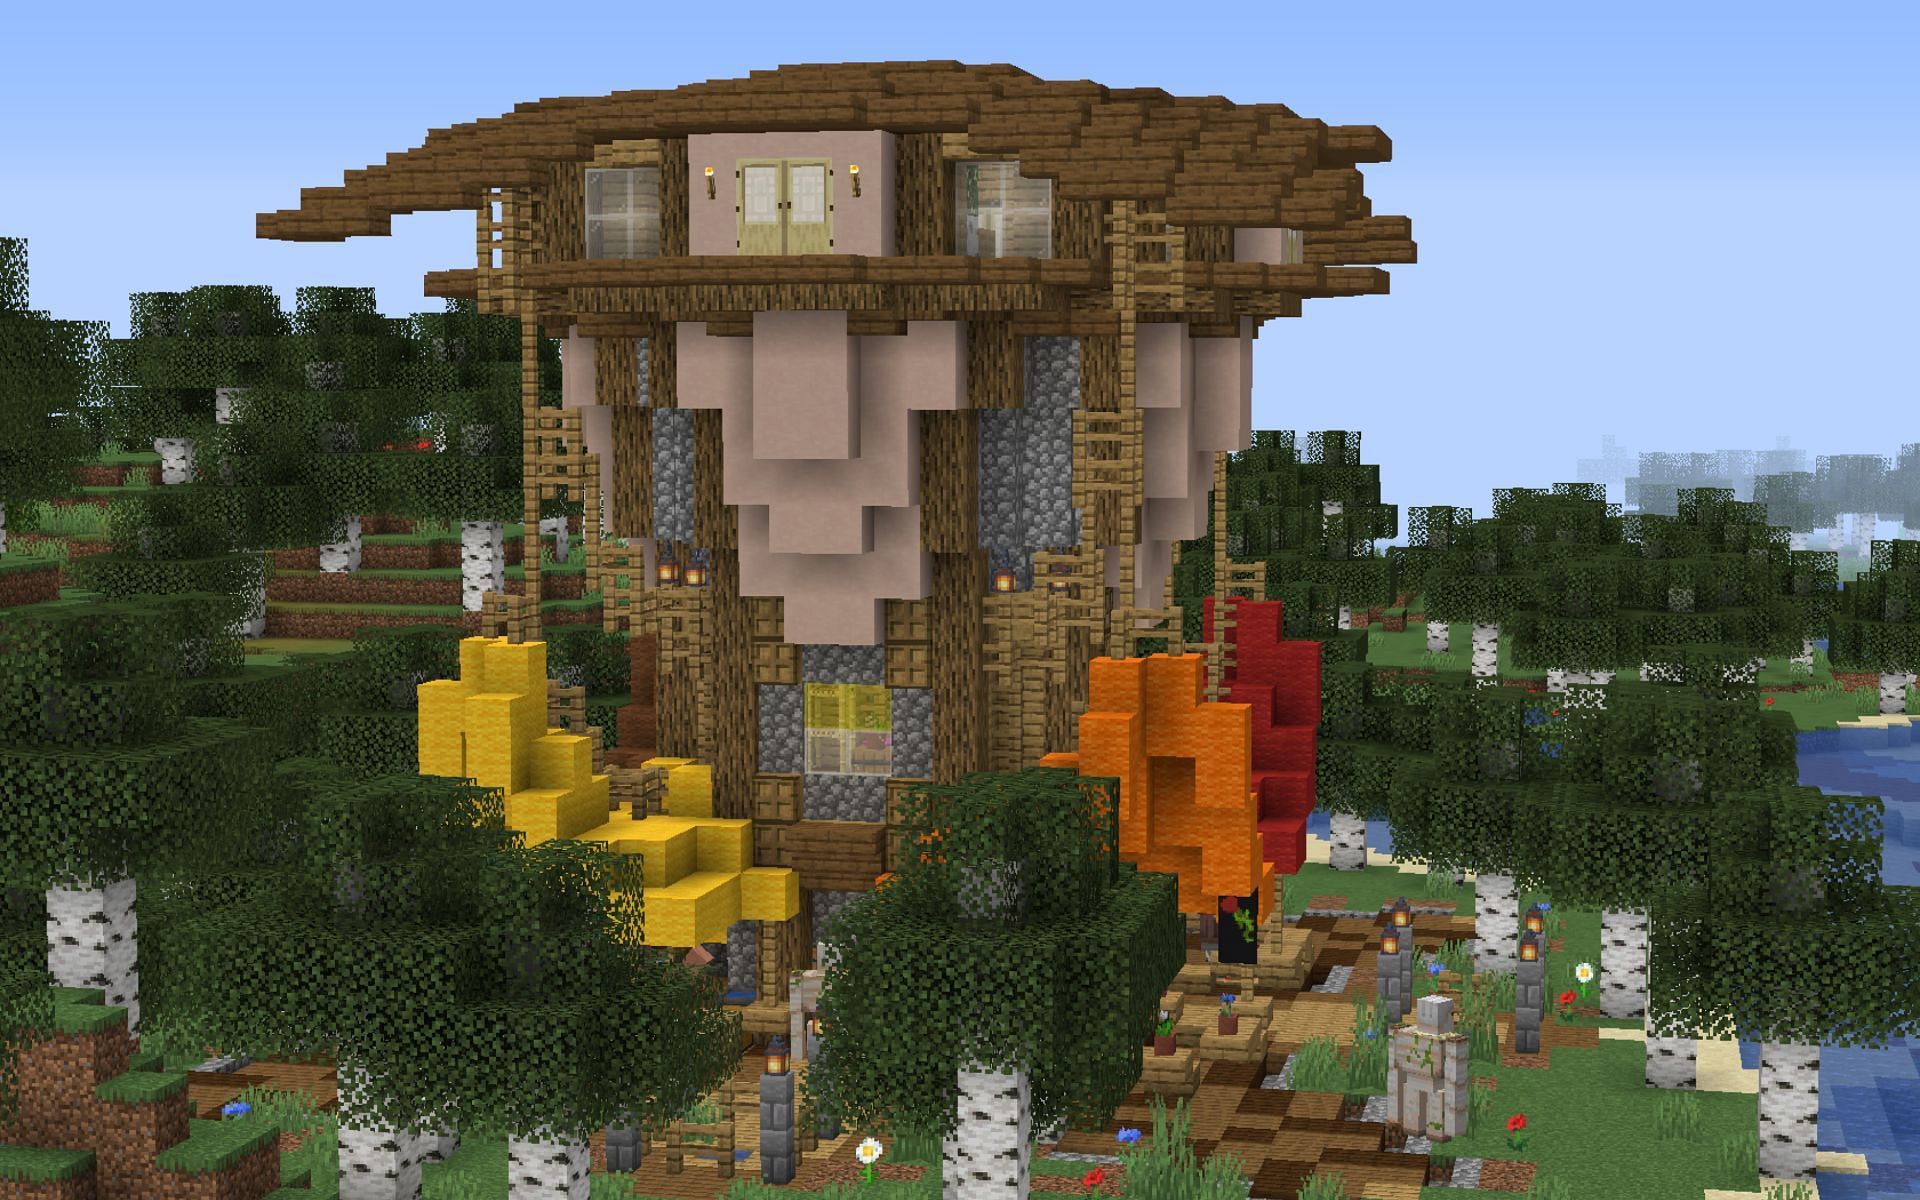 New blocks and structures bring fresh content to Minecraft (Image via Mojang)